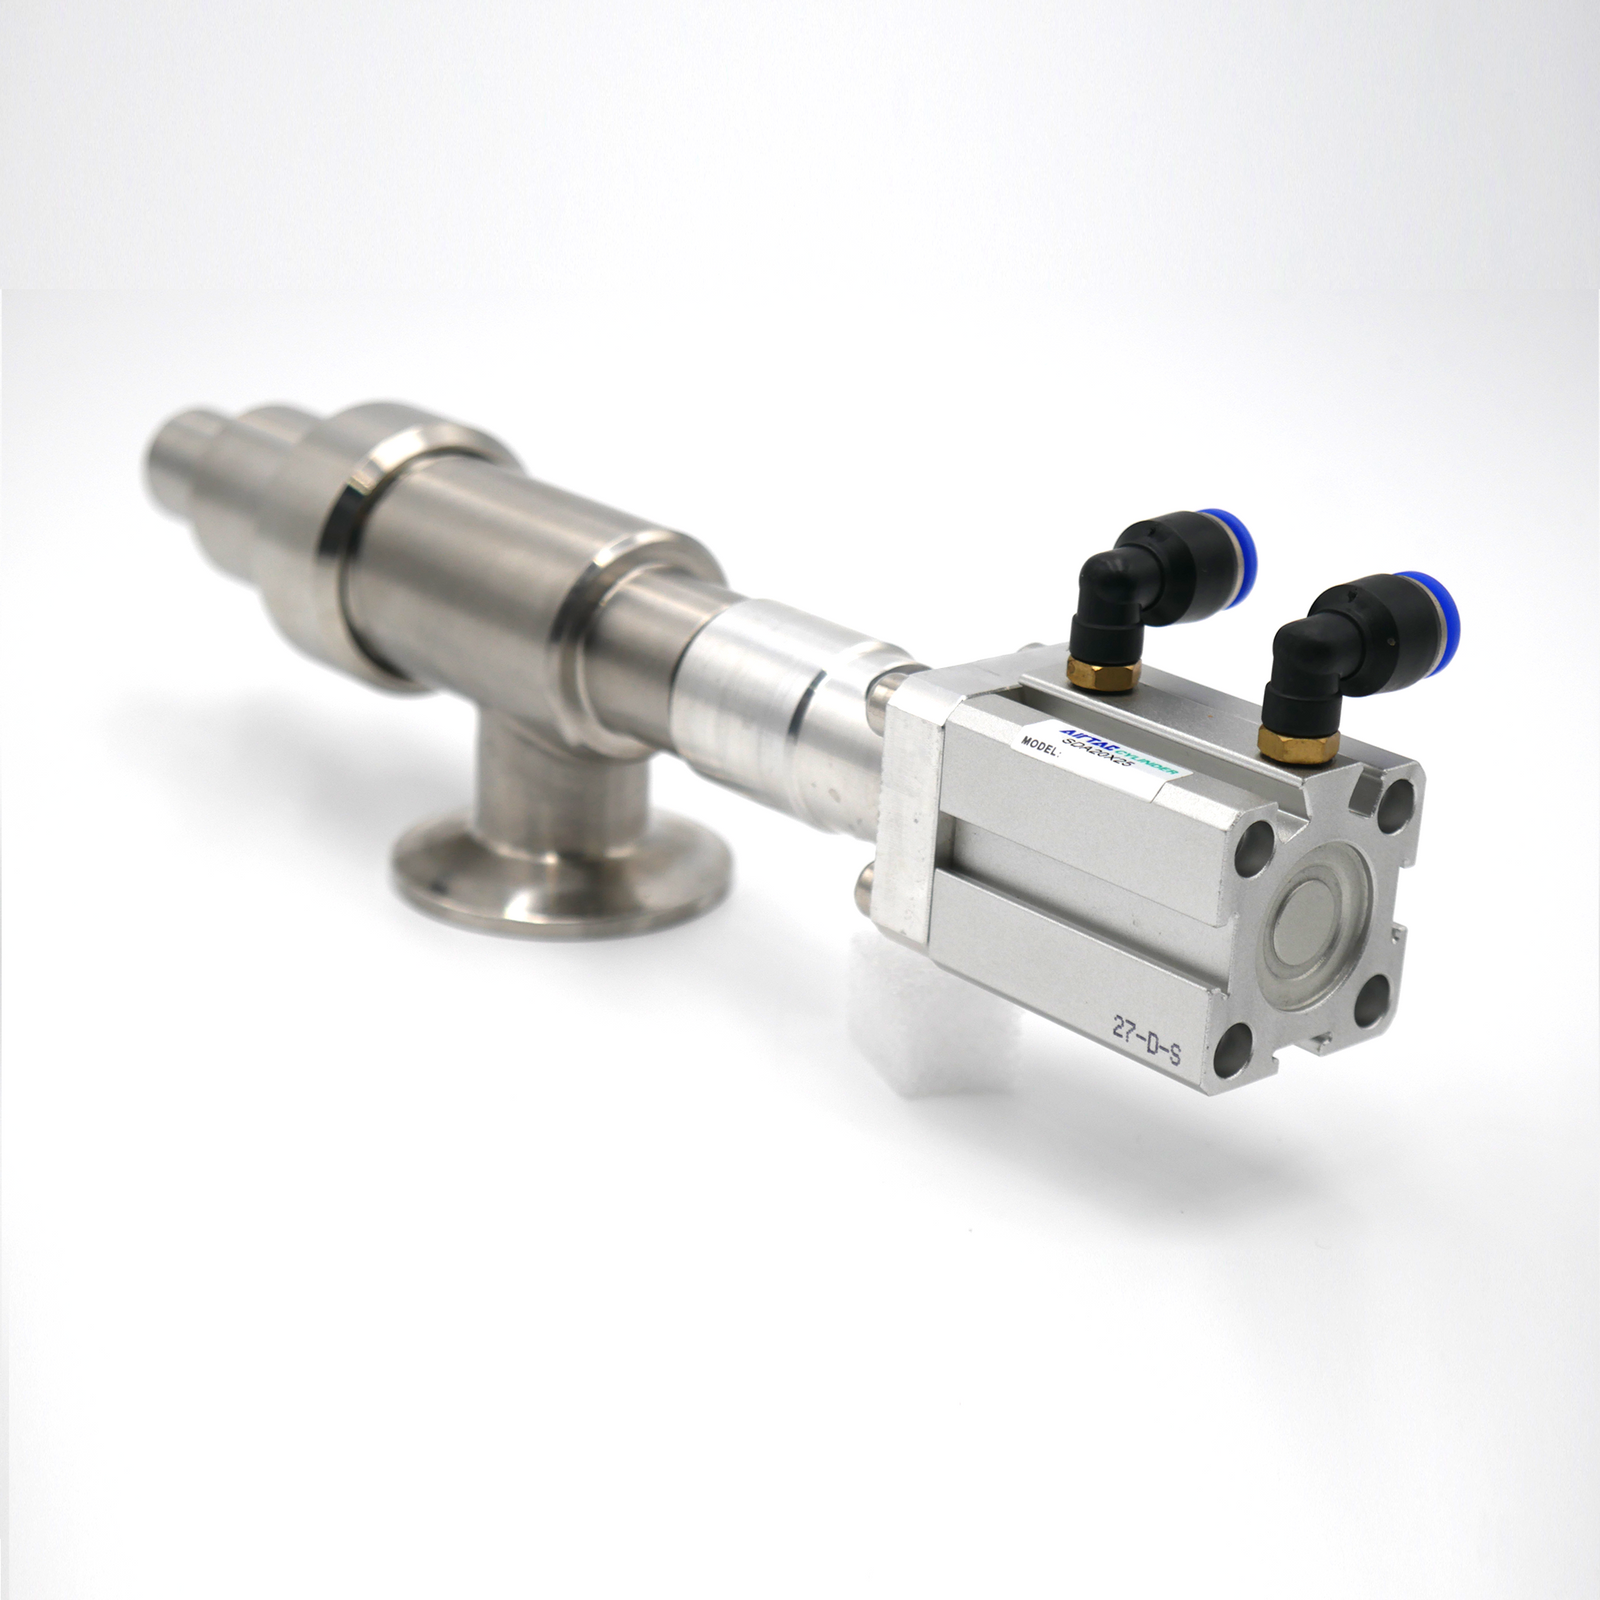 19mm dispensing nozzle assembly for liquid filling machines